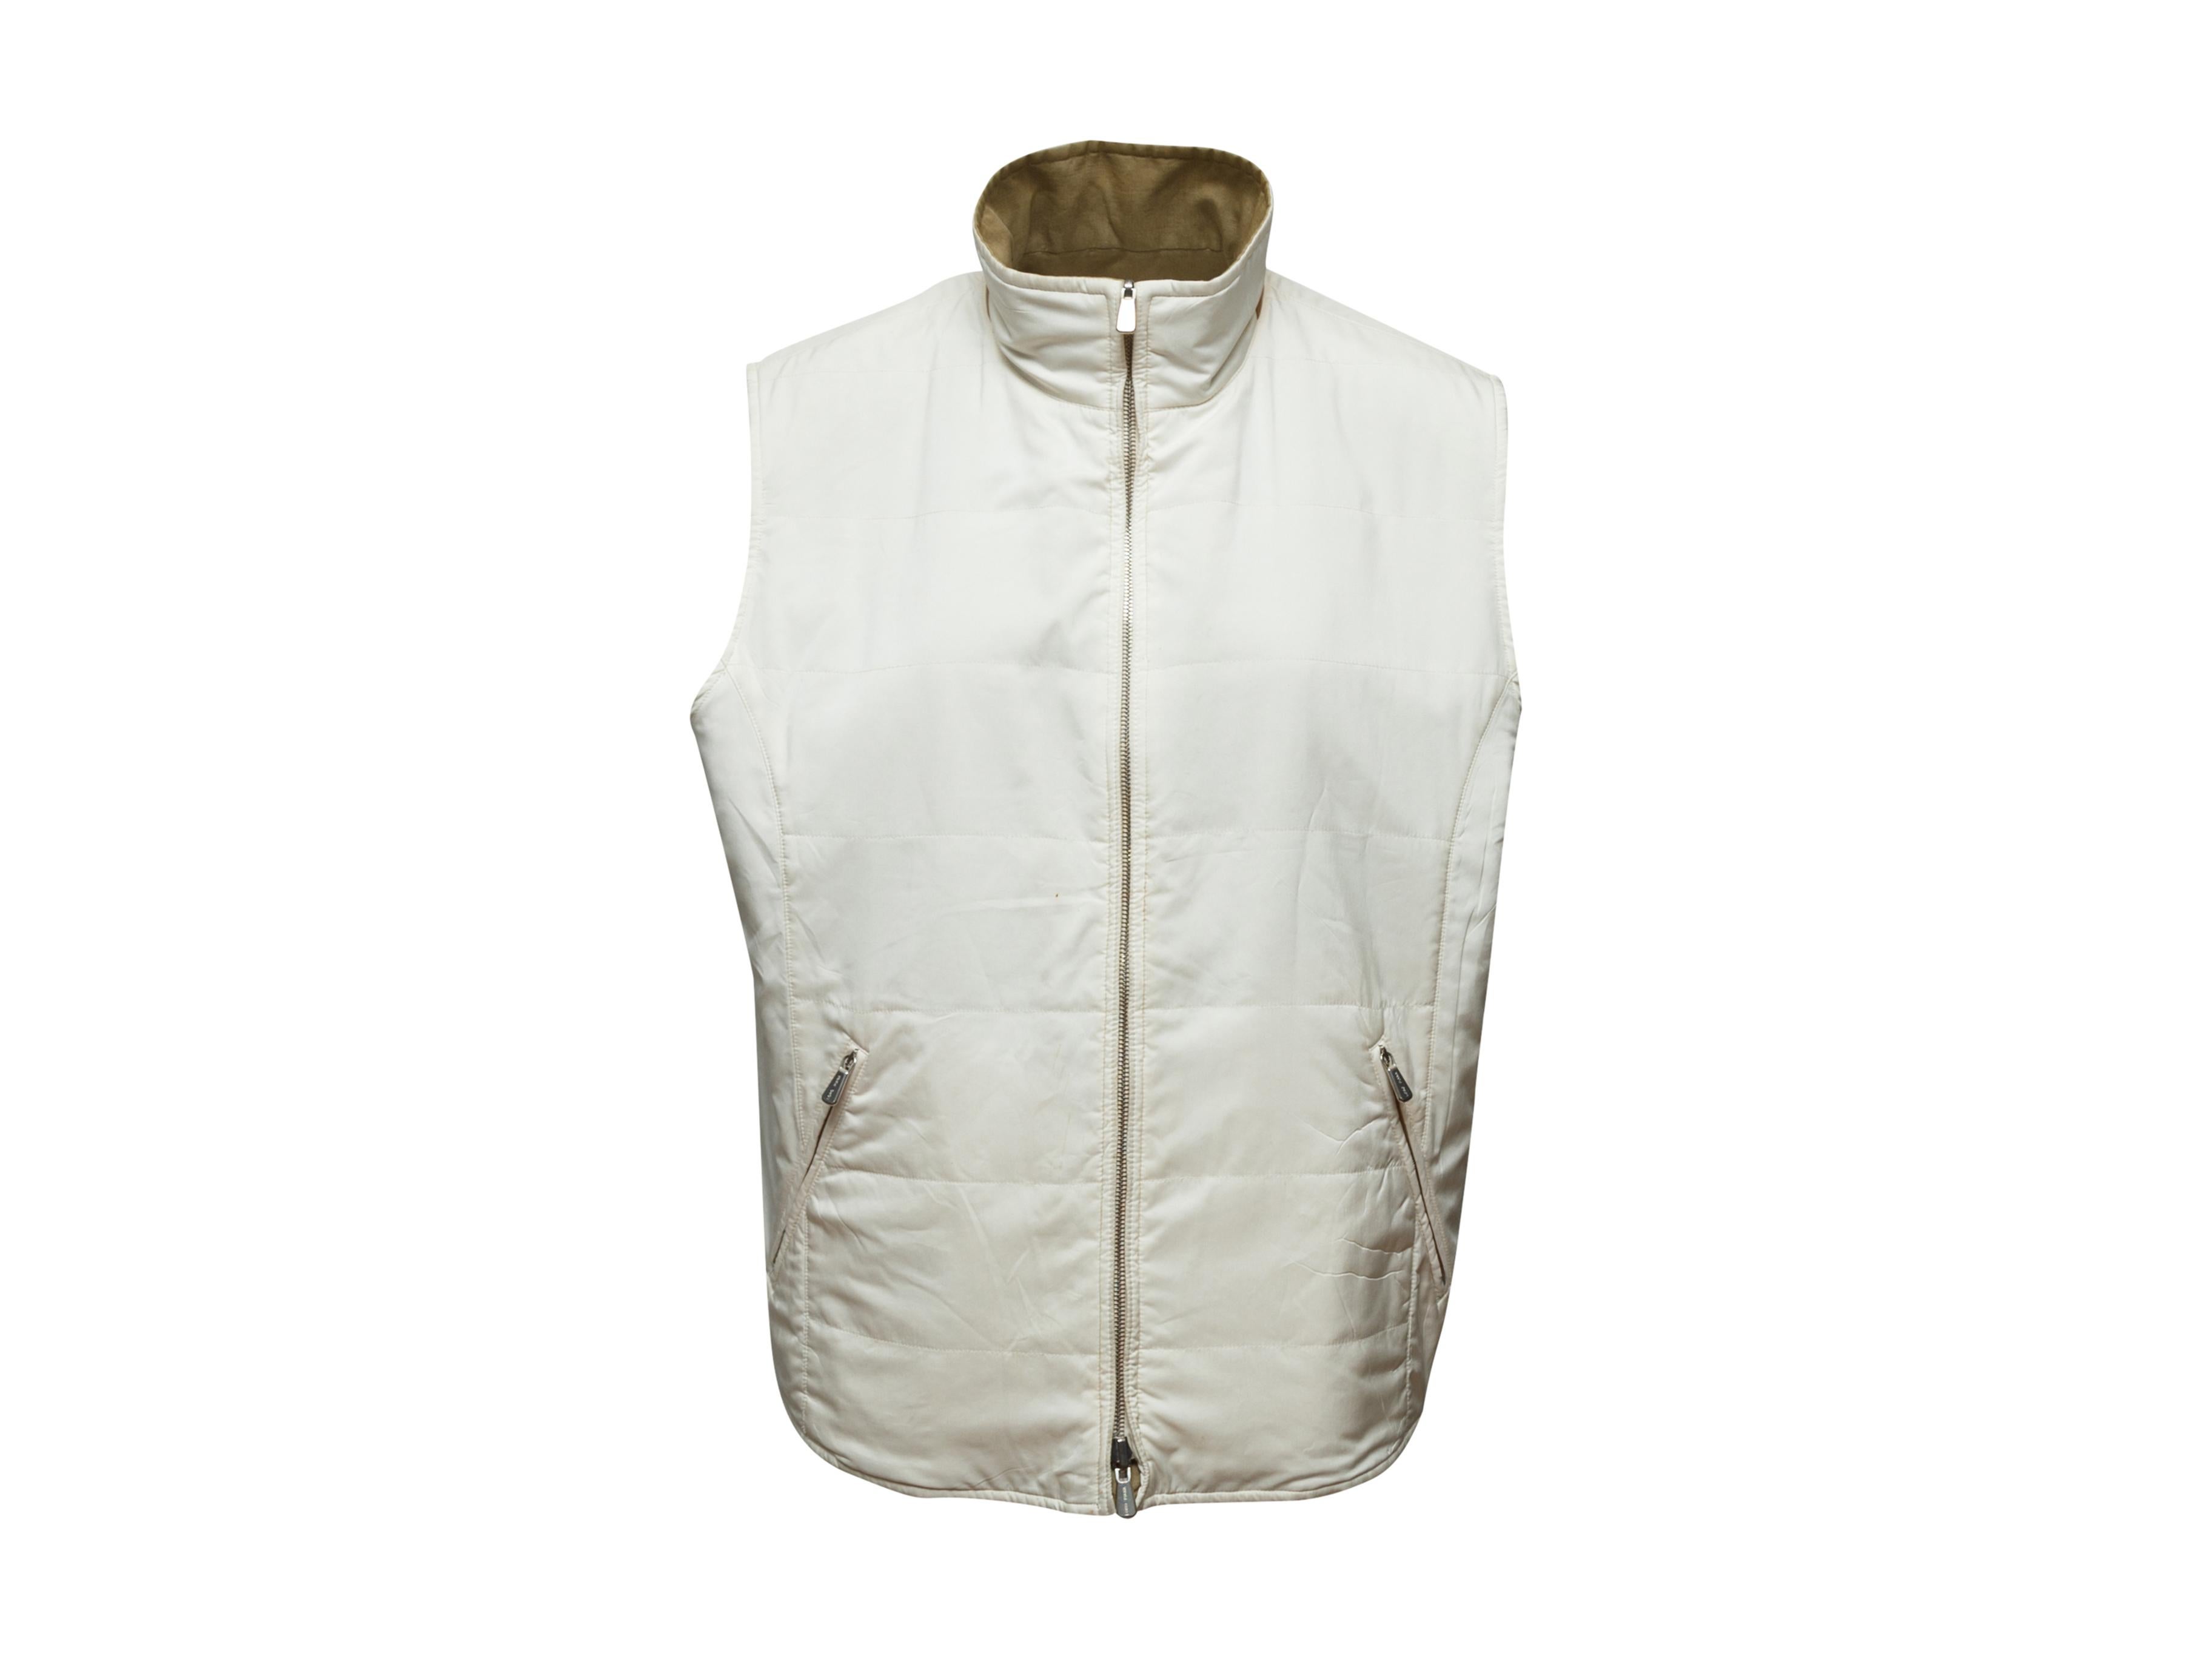 Product details: Khaki and white reversible vest by Loro Piana. High collar. Dual pockets. Zip closure at center front. 44